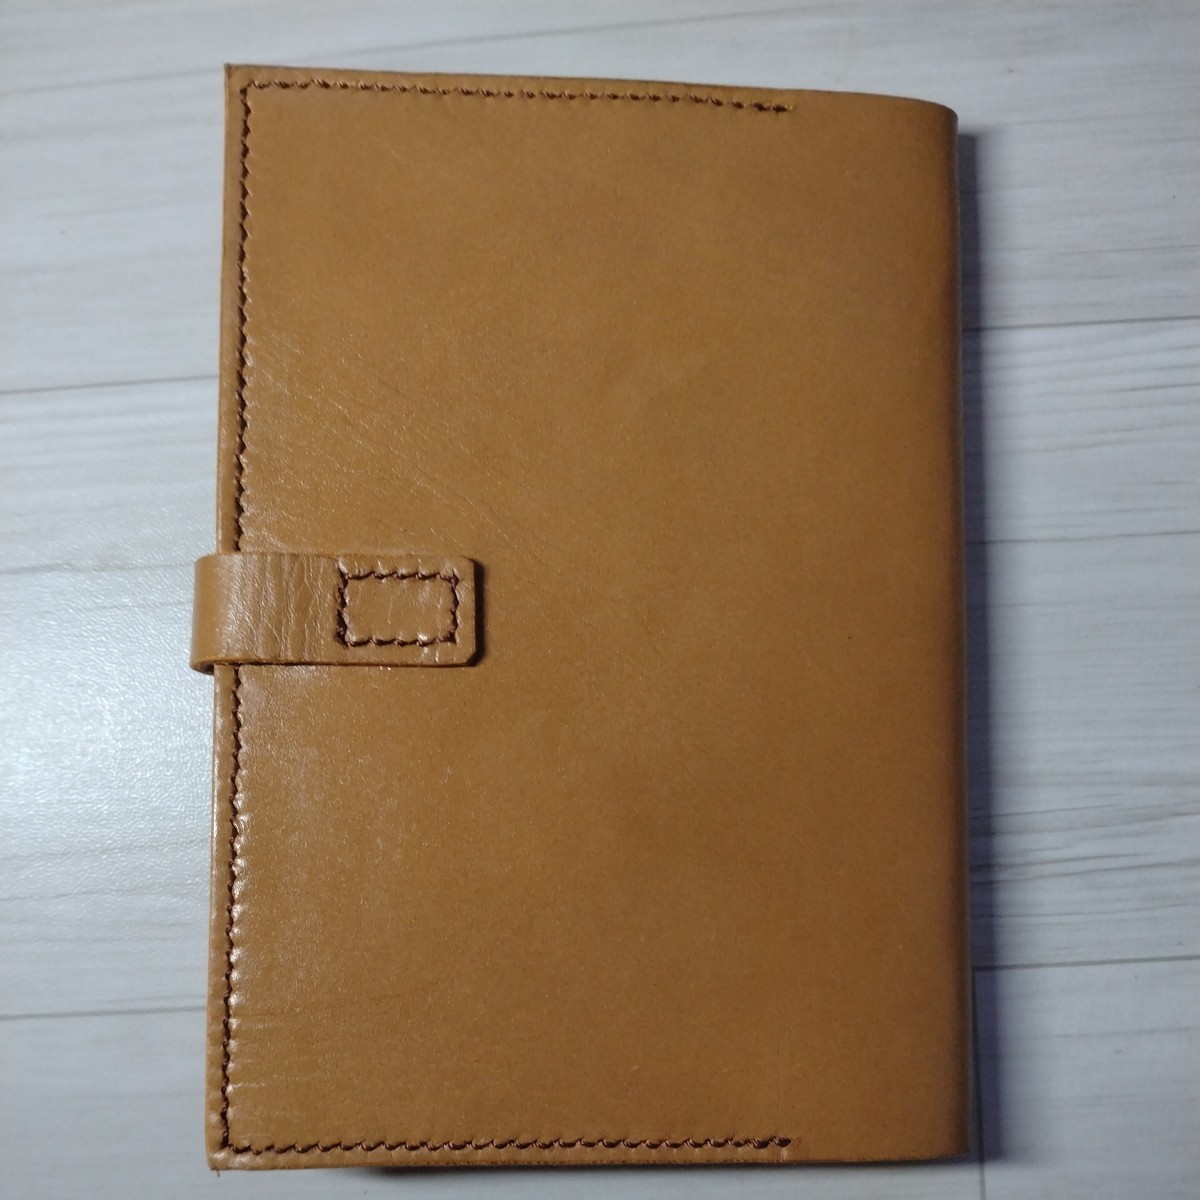  leather book cover Note cover hand made A6 size Muji Ryohin Note attaching. 